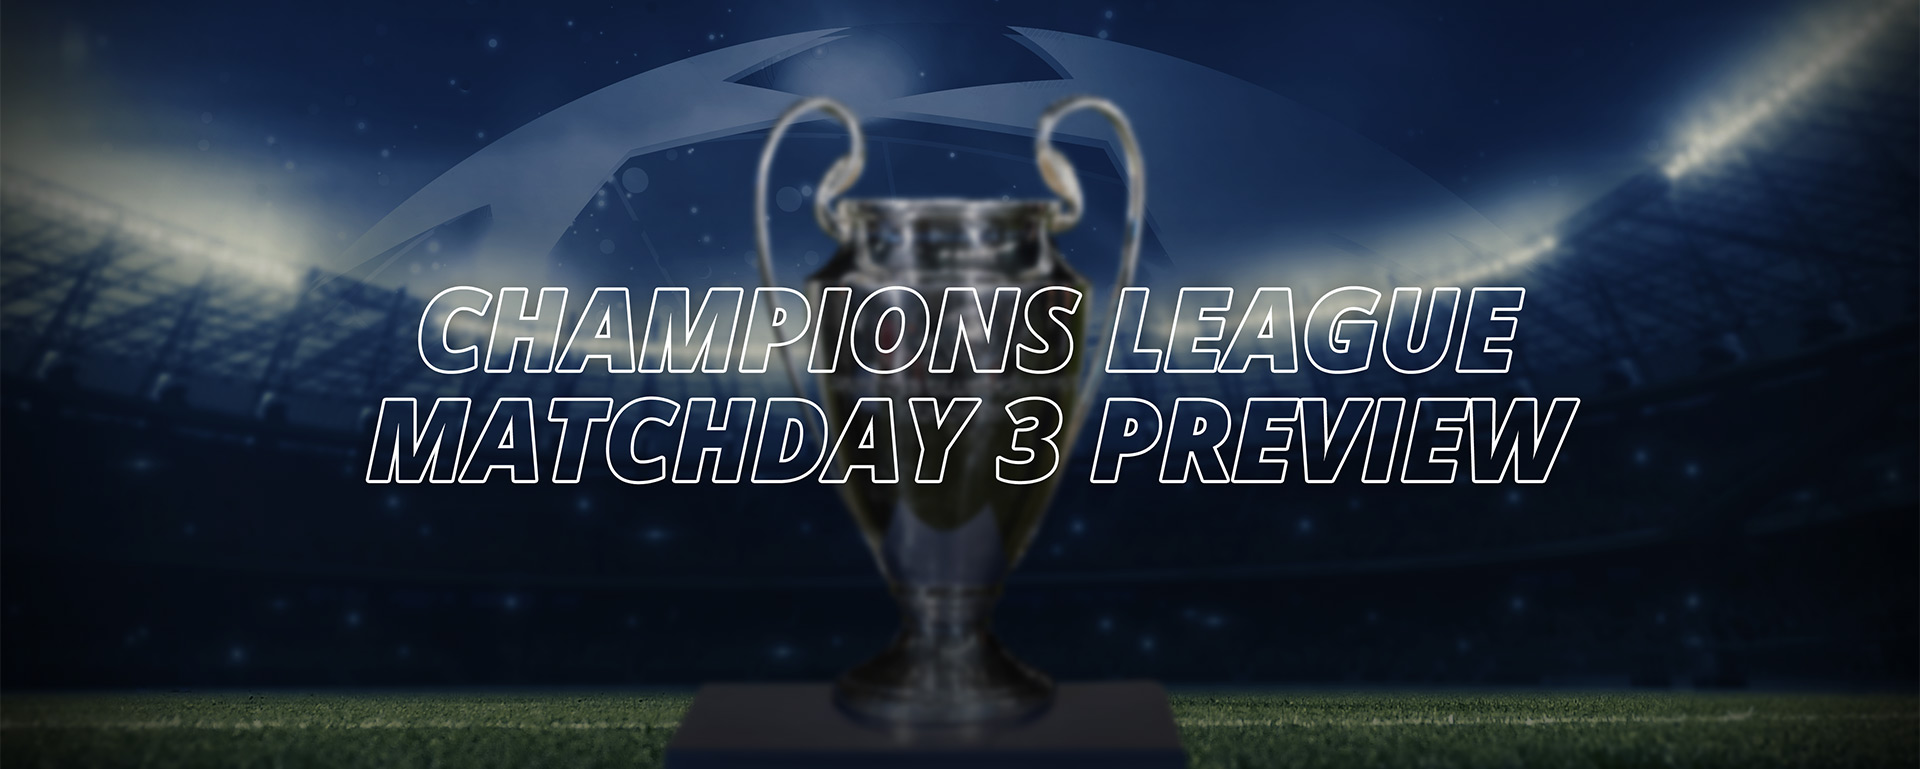 CHAMPIONS LEAGUE: MATCHDAY 3 PREVIEW